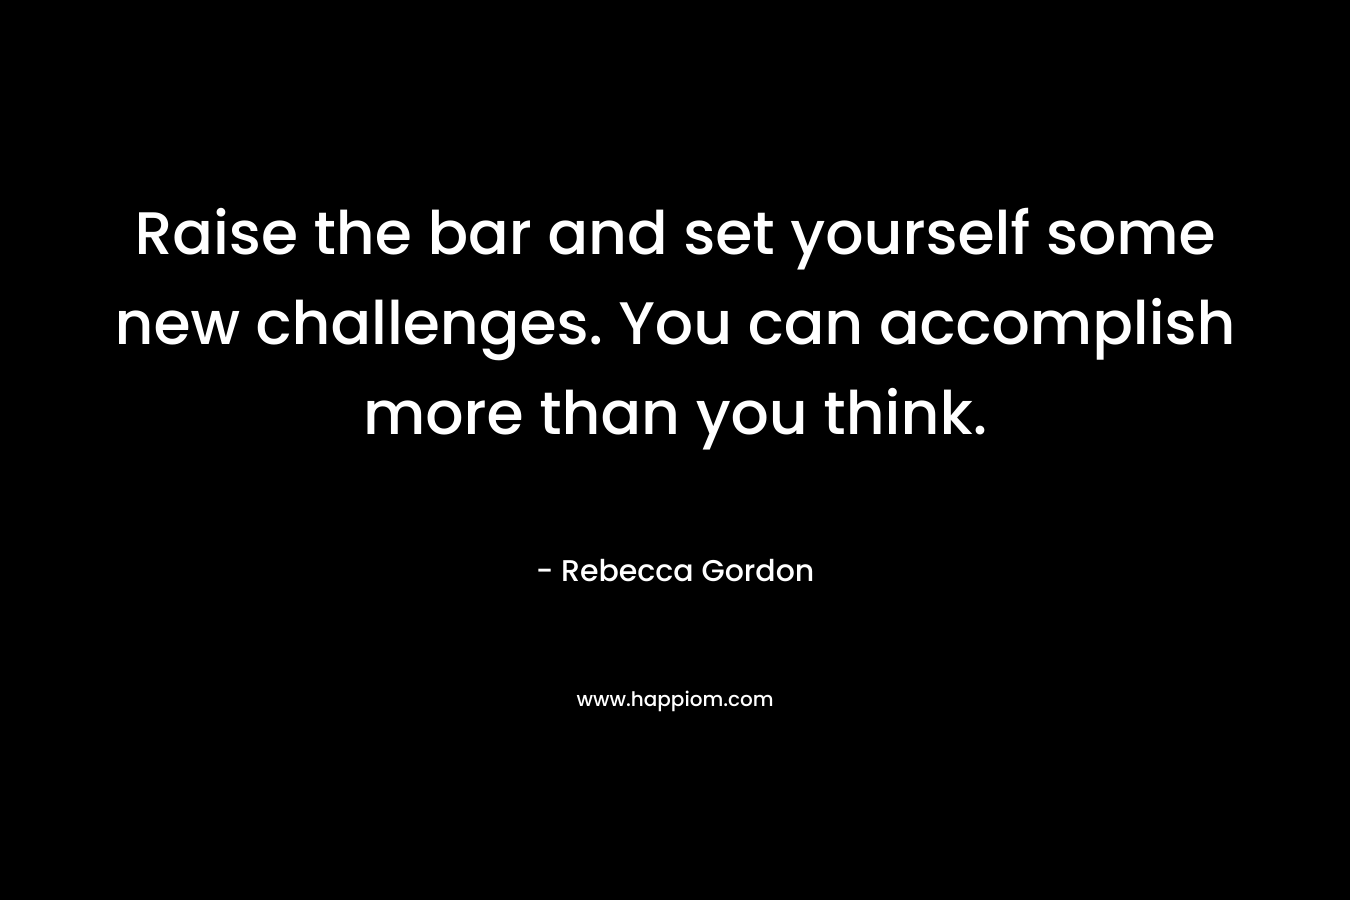 Raise the bar and set yourself some new challenges. You can accomplish more than you think. – Rebecca Gordon